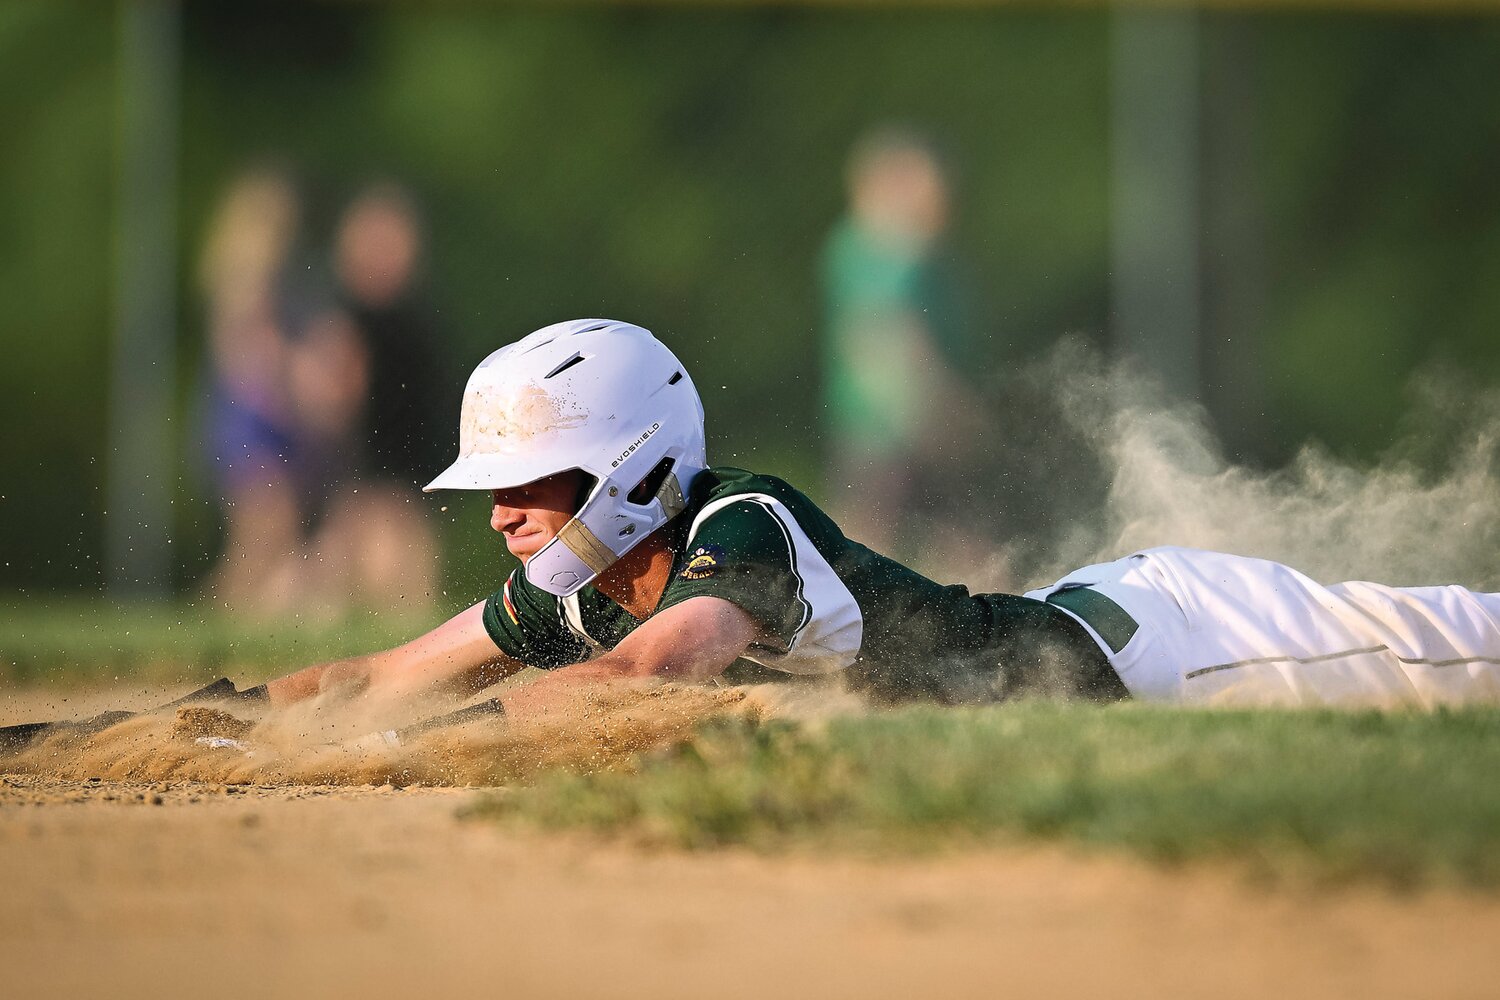 Pennridge’s Will Munley slides into second base with a first-inning stolen base.